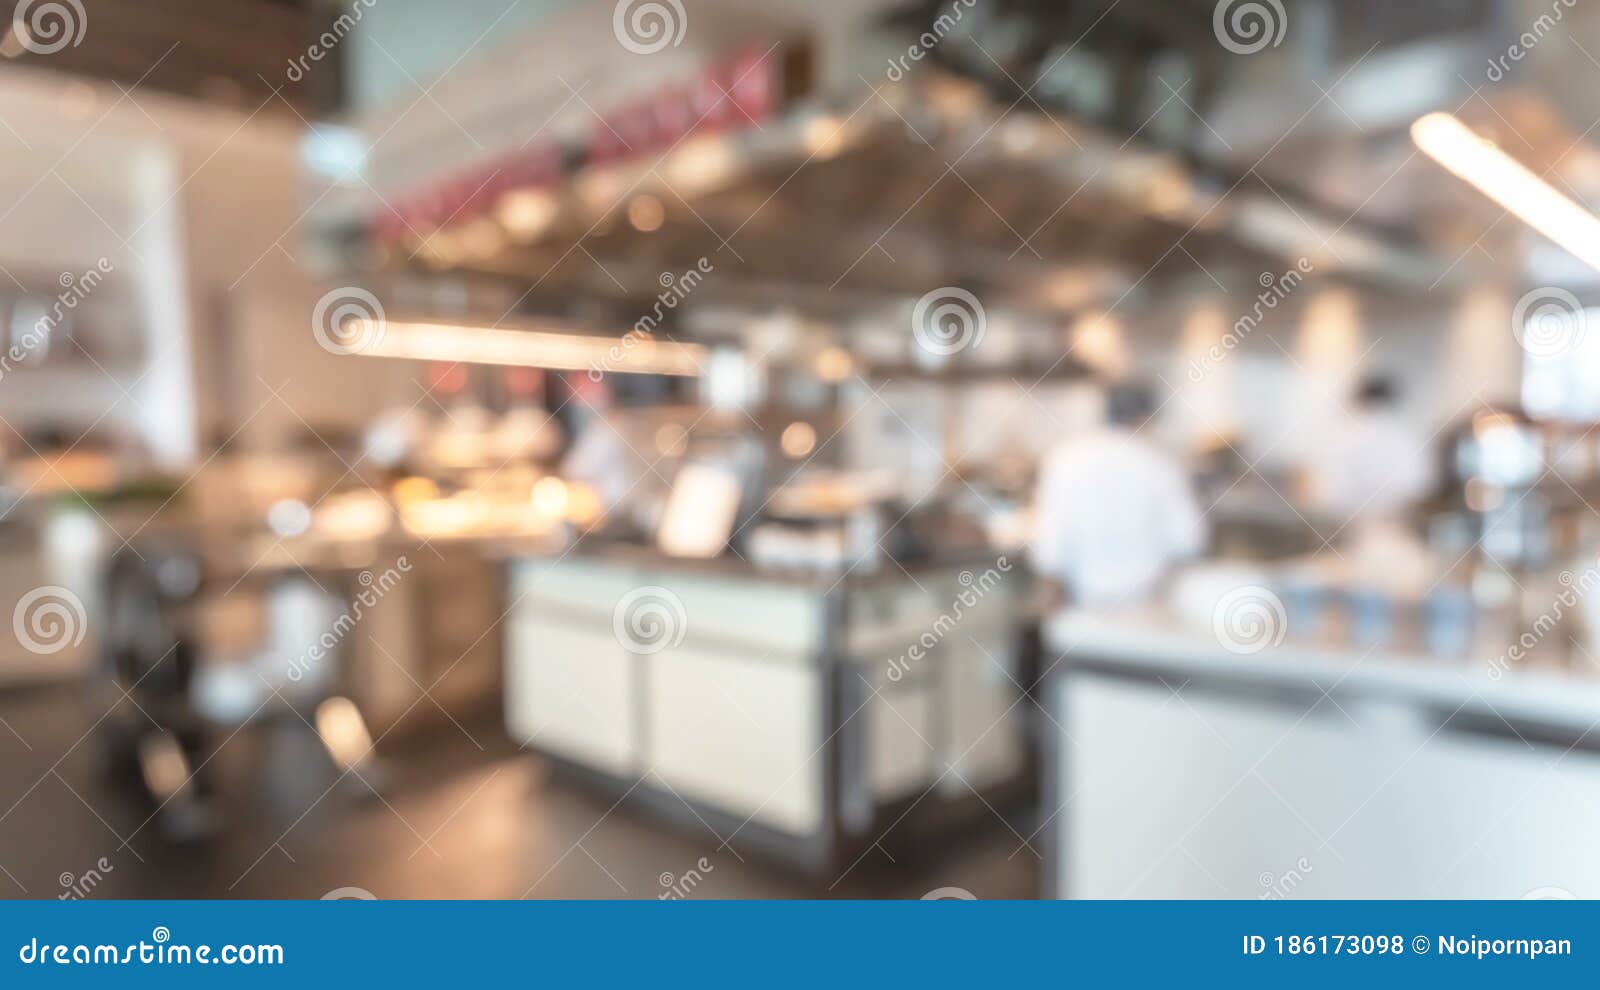 buffet at hotel restaurant interior blur background with blurry open kitchen counter bar of food catering service business